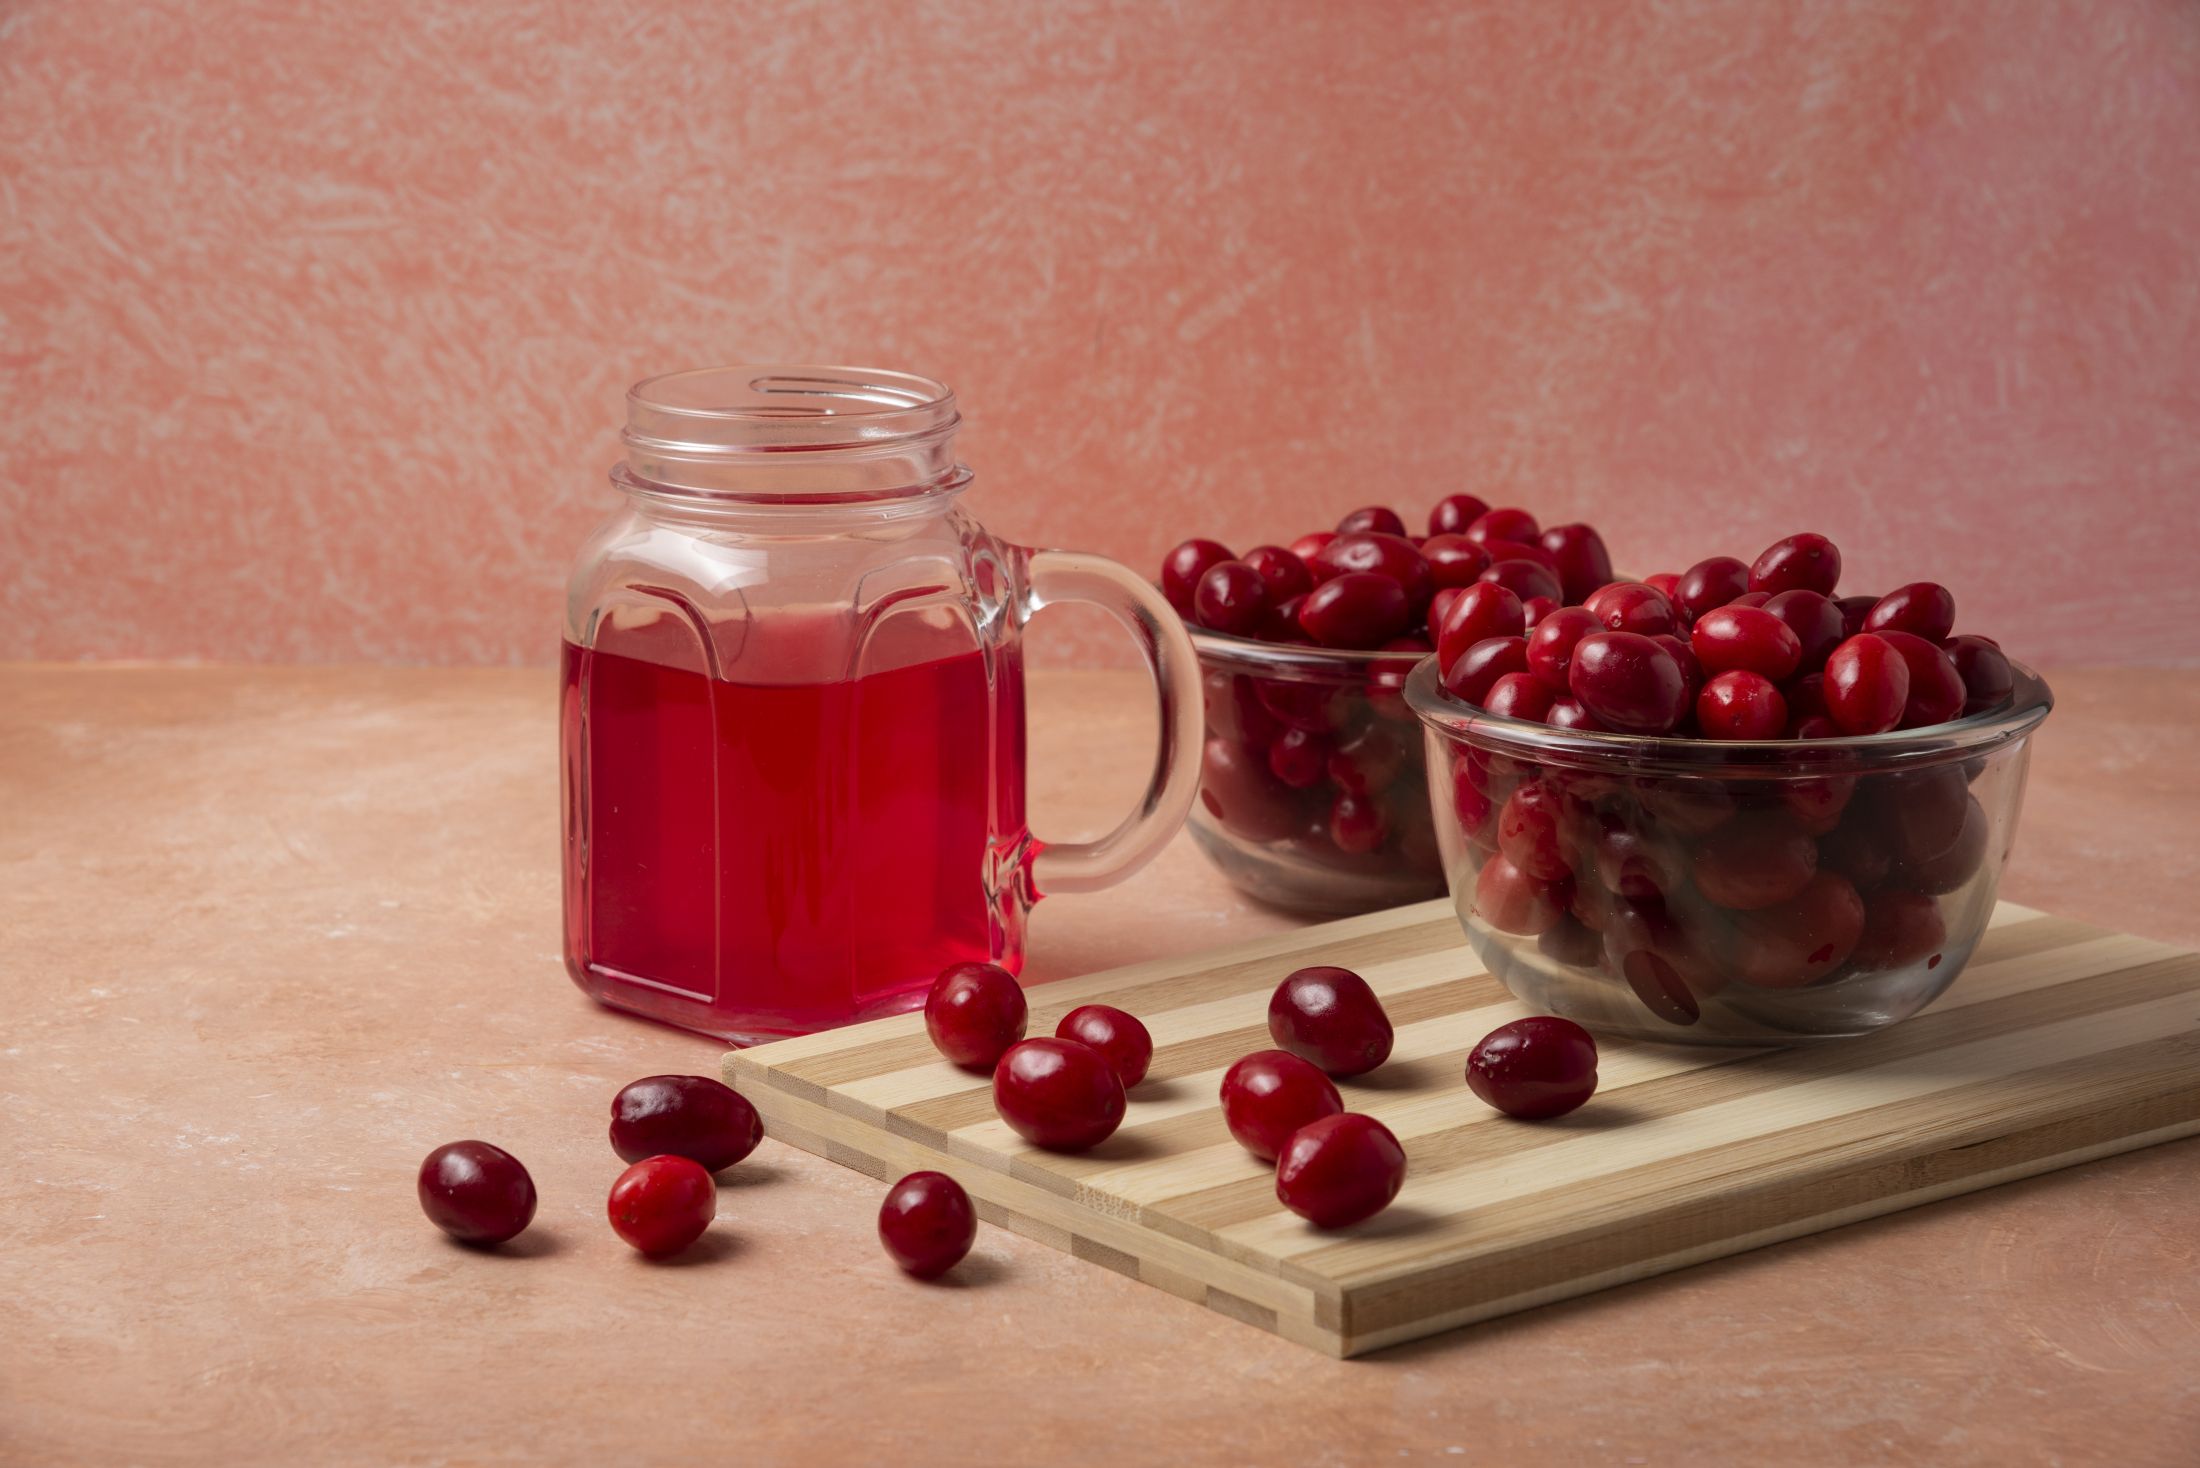 cornels-in-glass-cup-and-juice-in-a-jar-on-a-pink-background.jpg